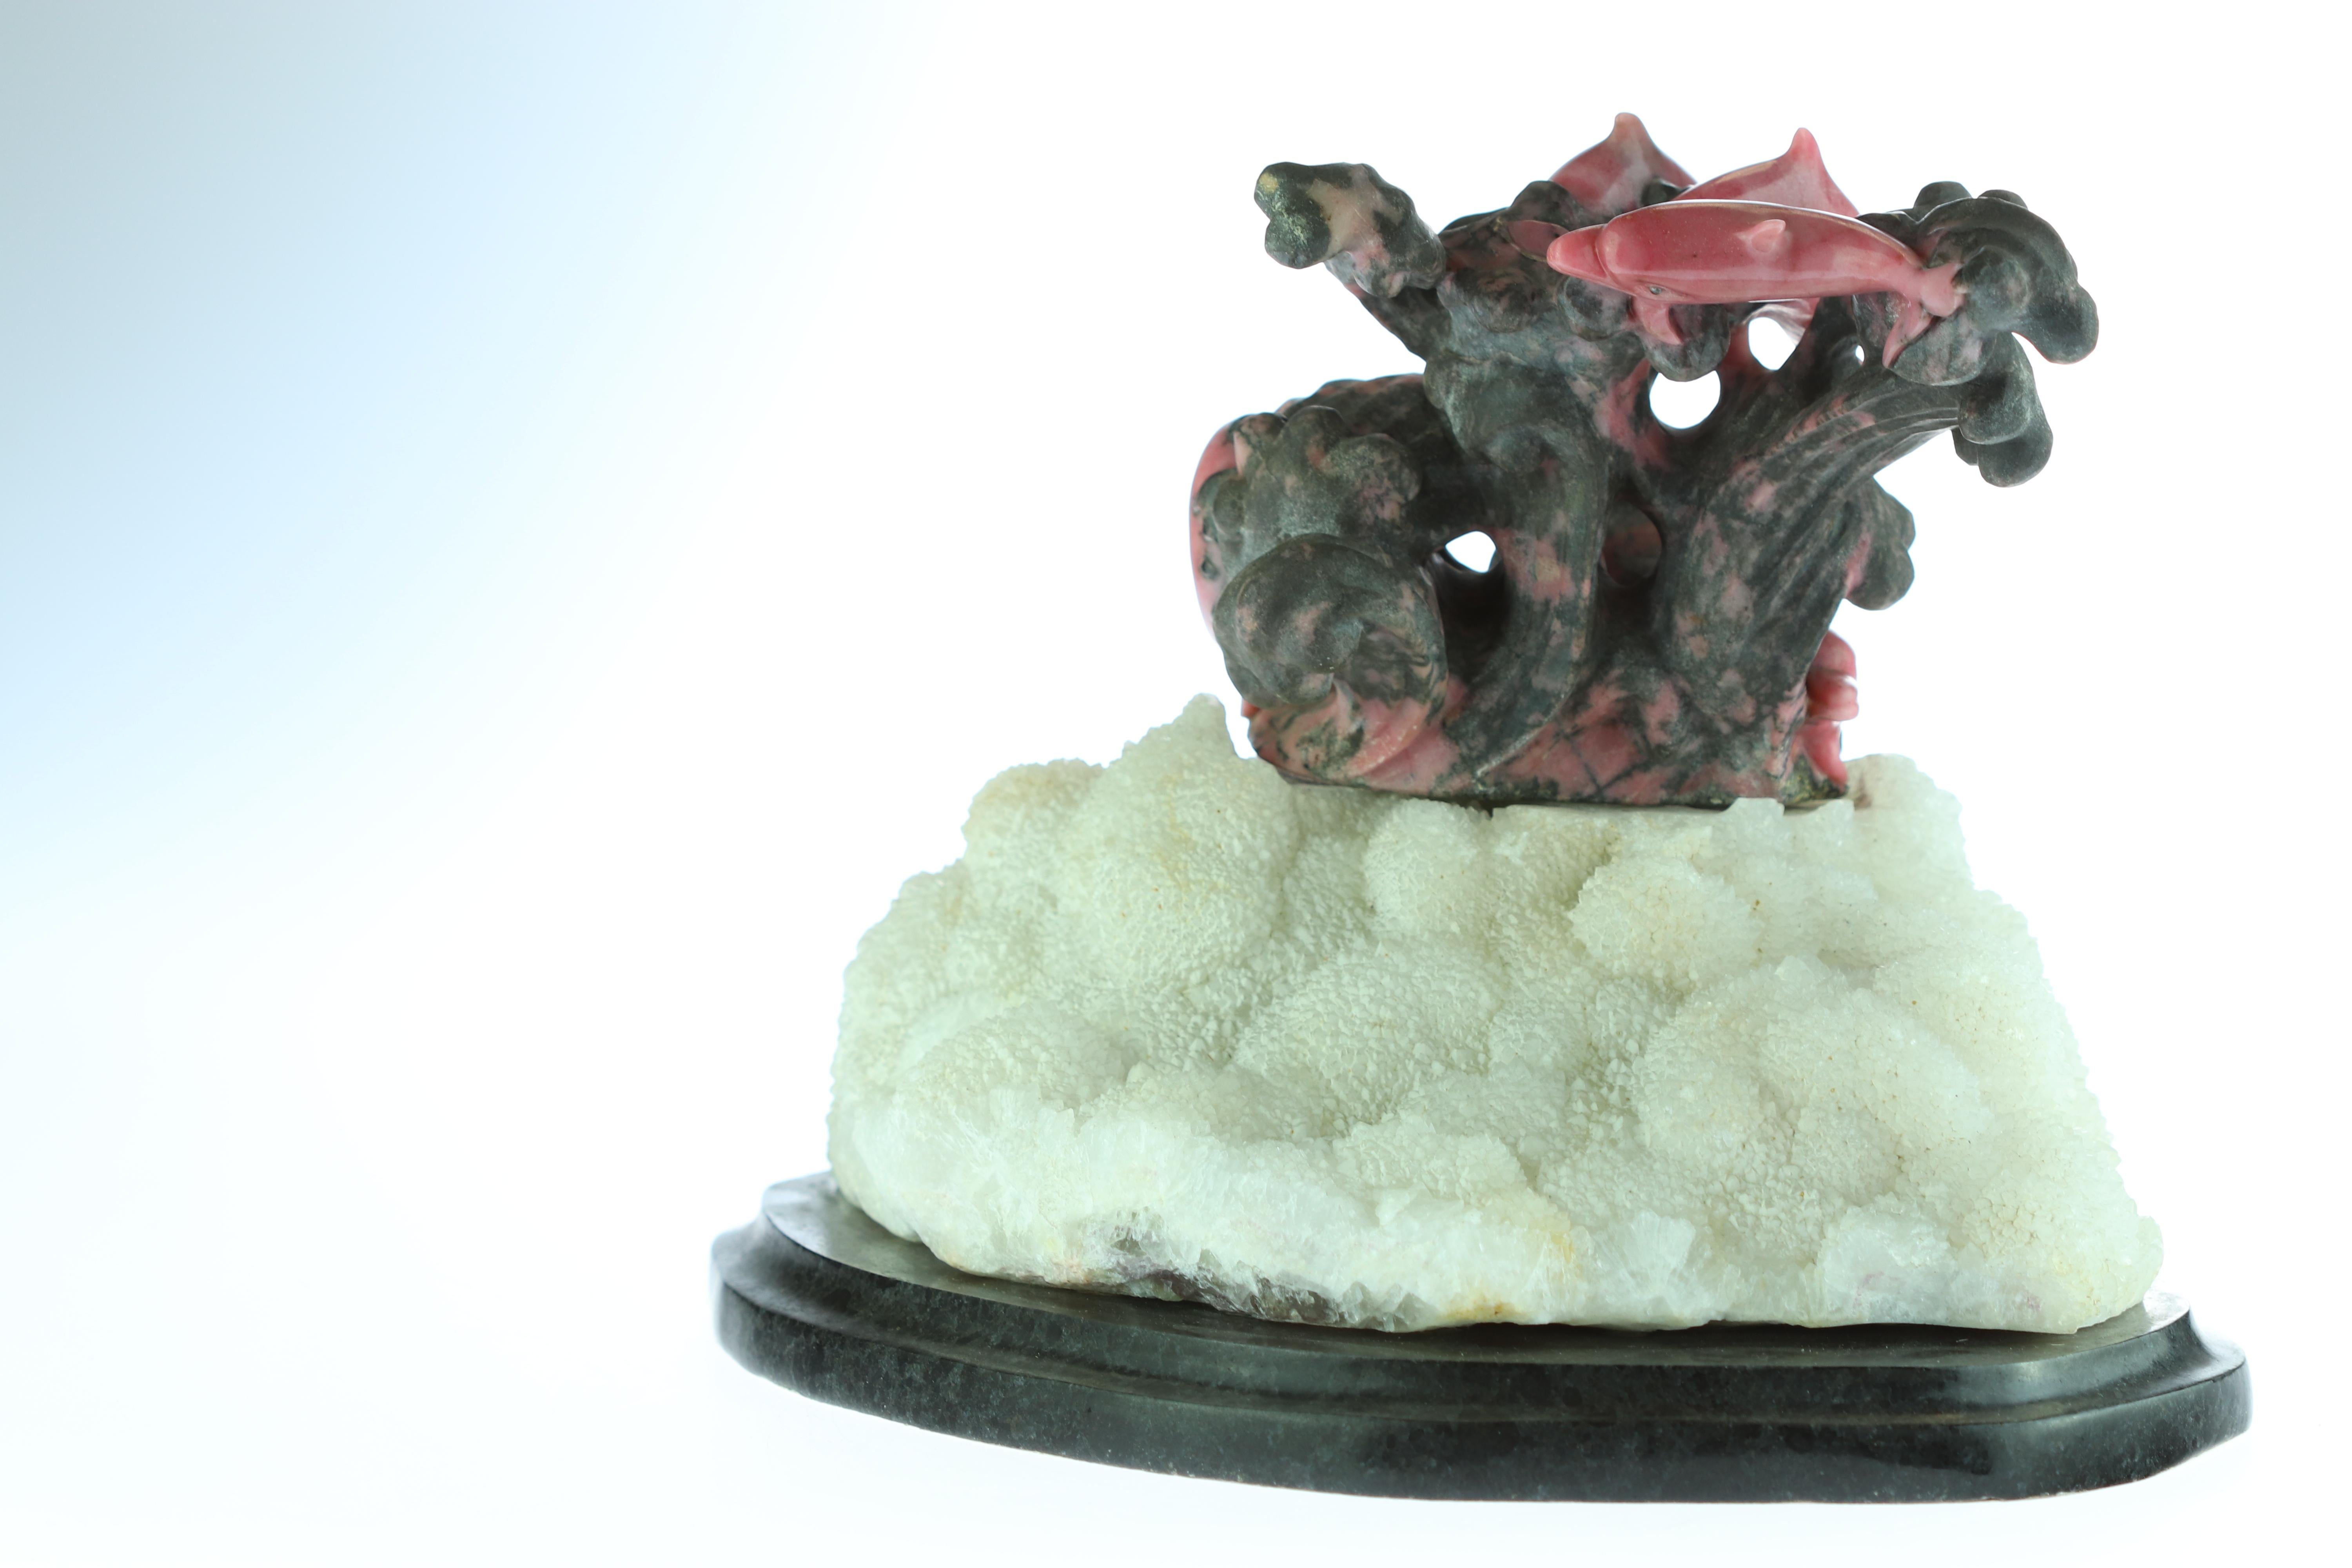 Chinese Export Natural Rhodochrosite Dolphins Figurine Carved Animal Artisanal Statue Sculpture For Sale